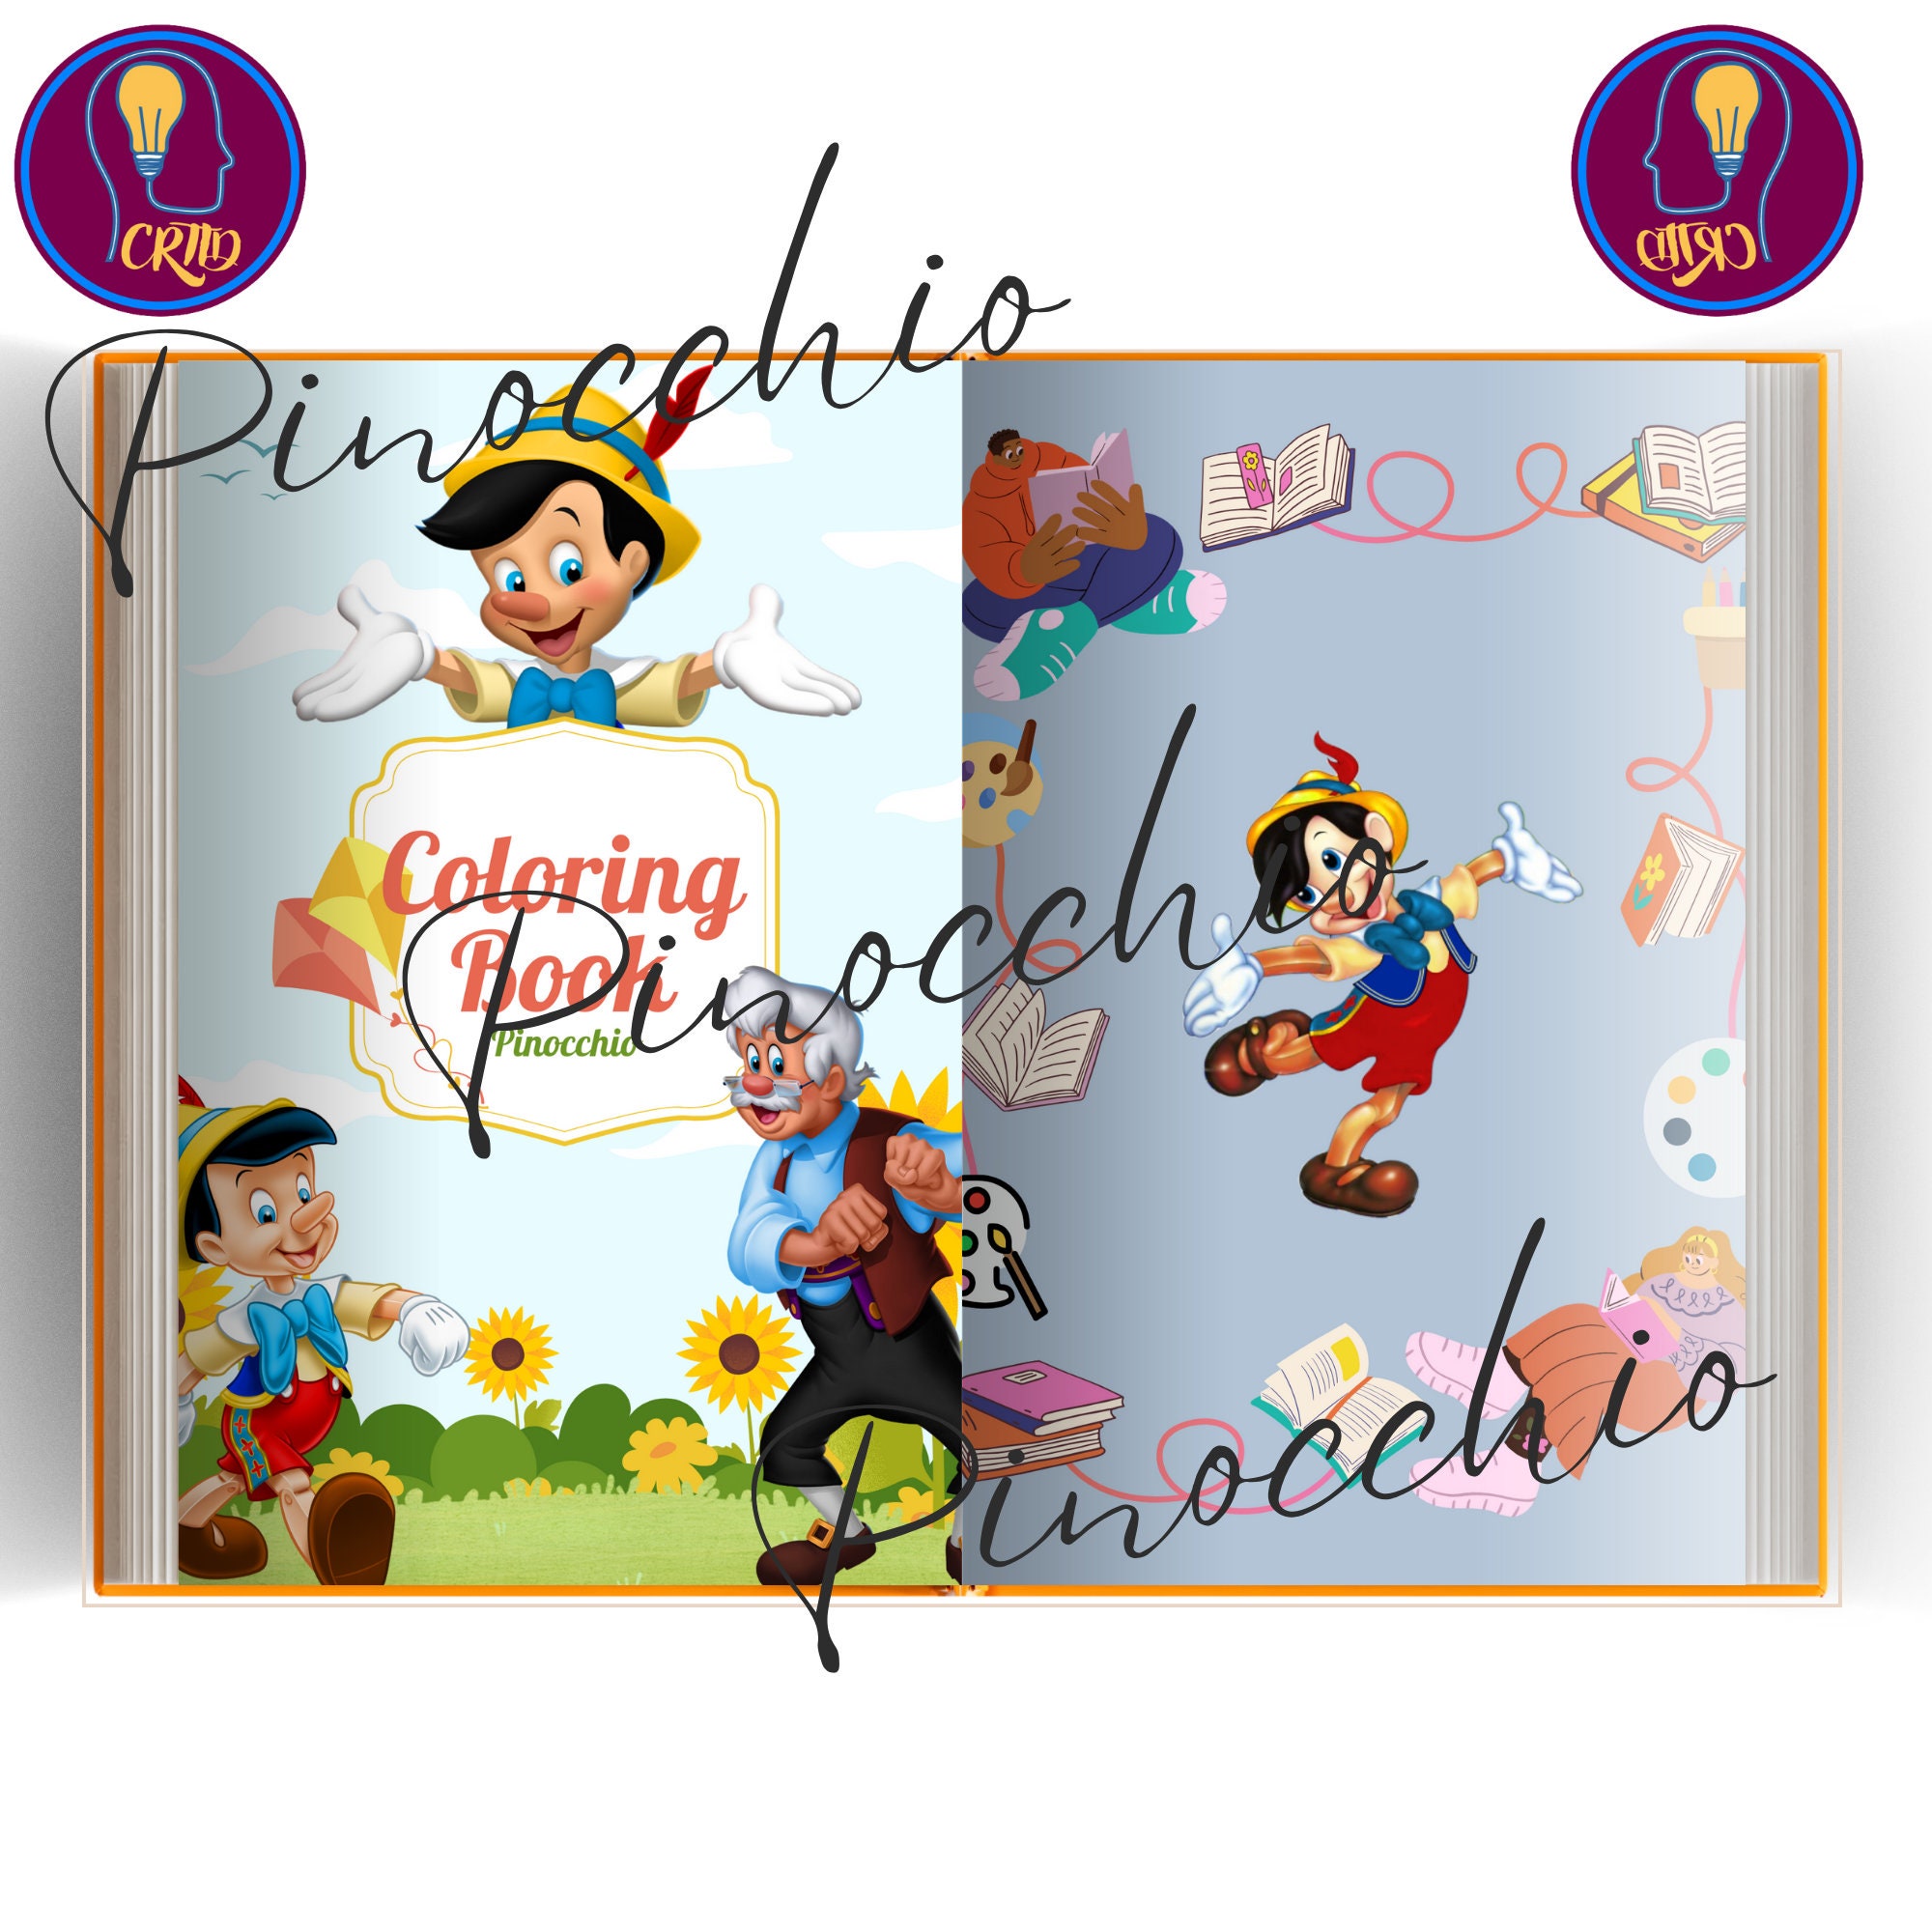 Pinocchio: A Puppet Storybook/vintage Stop Animation Book/children Picture  Book/puppetry and Stop Animation/heavy Cardboard Pages 